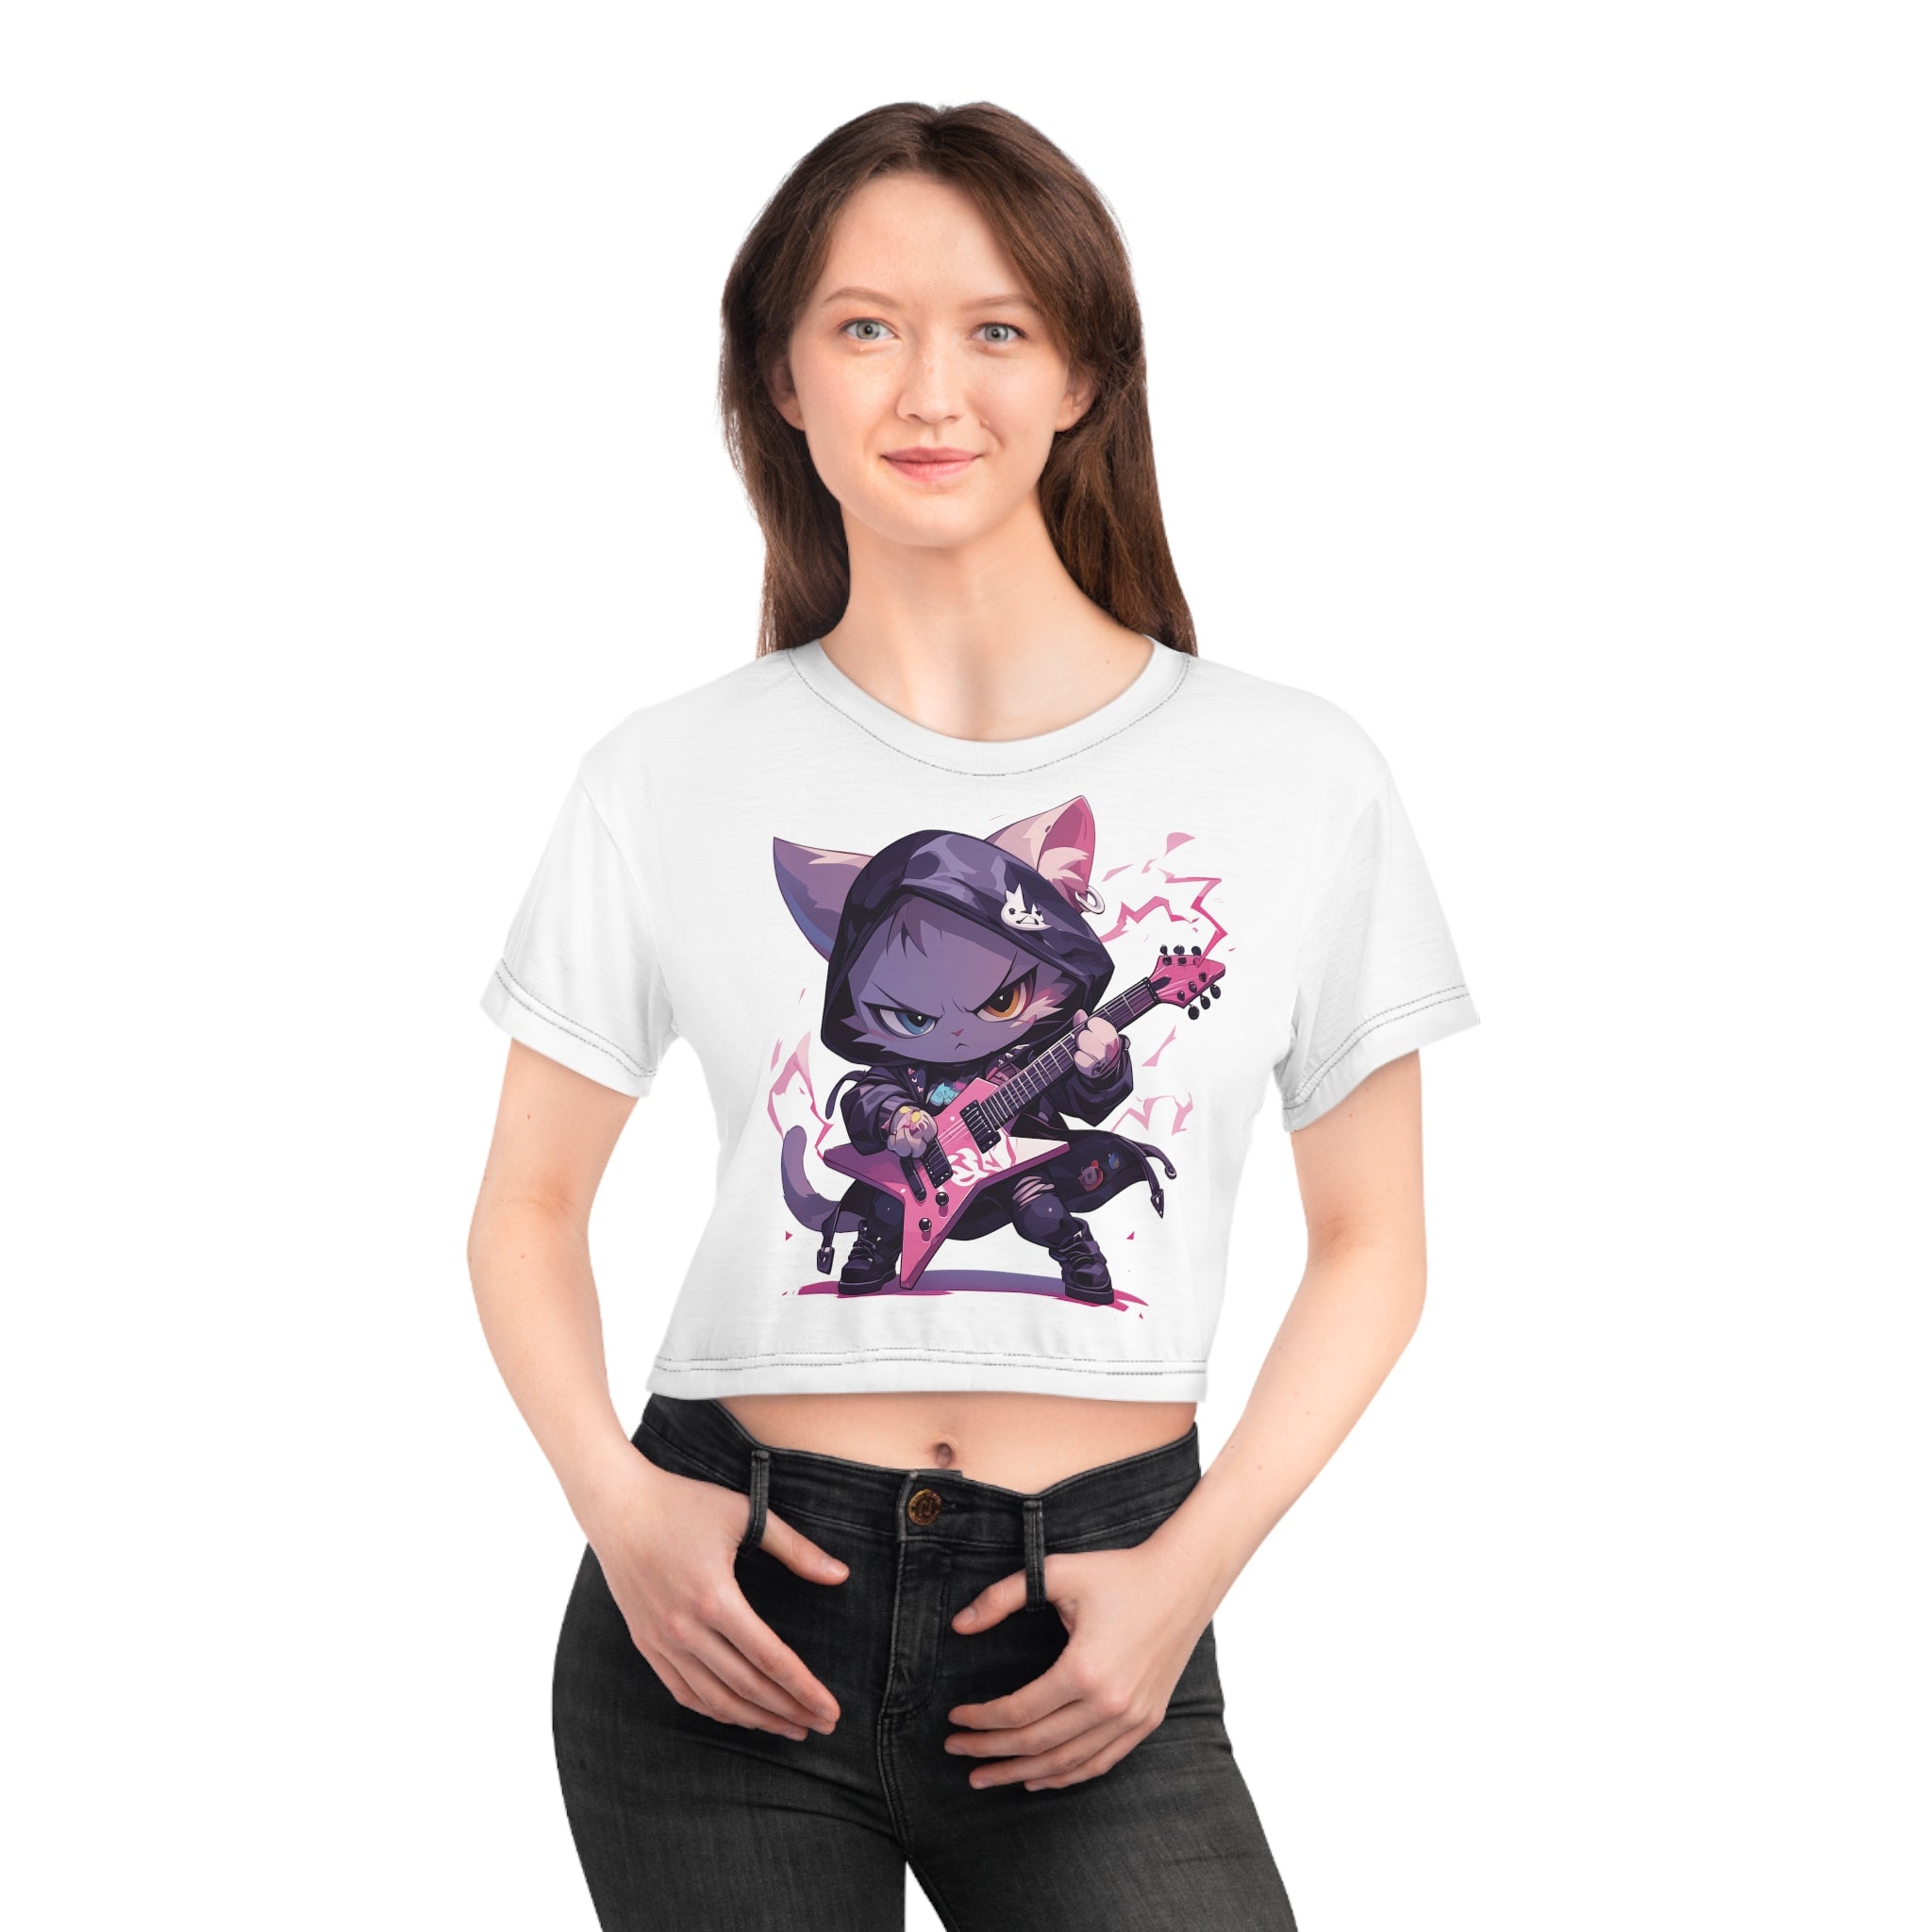 Cute Cat Playing Electric Guitar Crop Top - MiTo Store